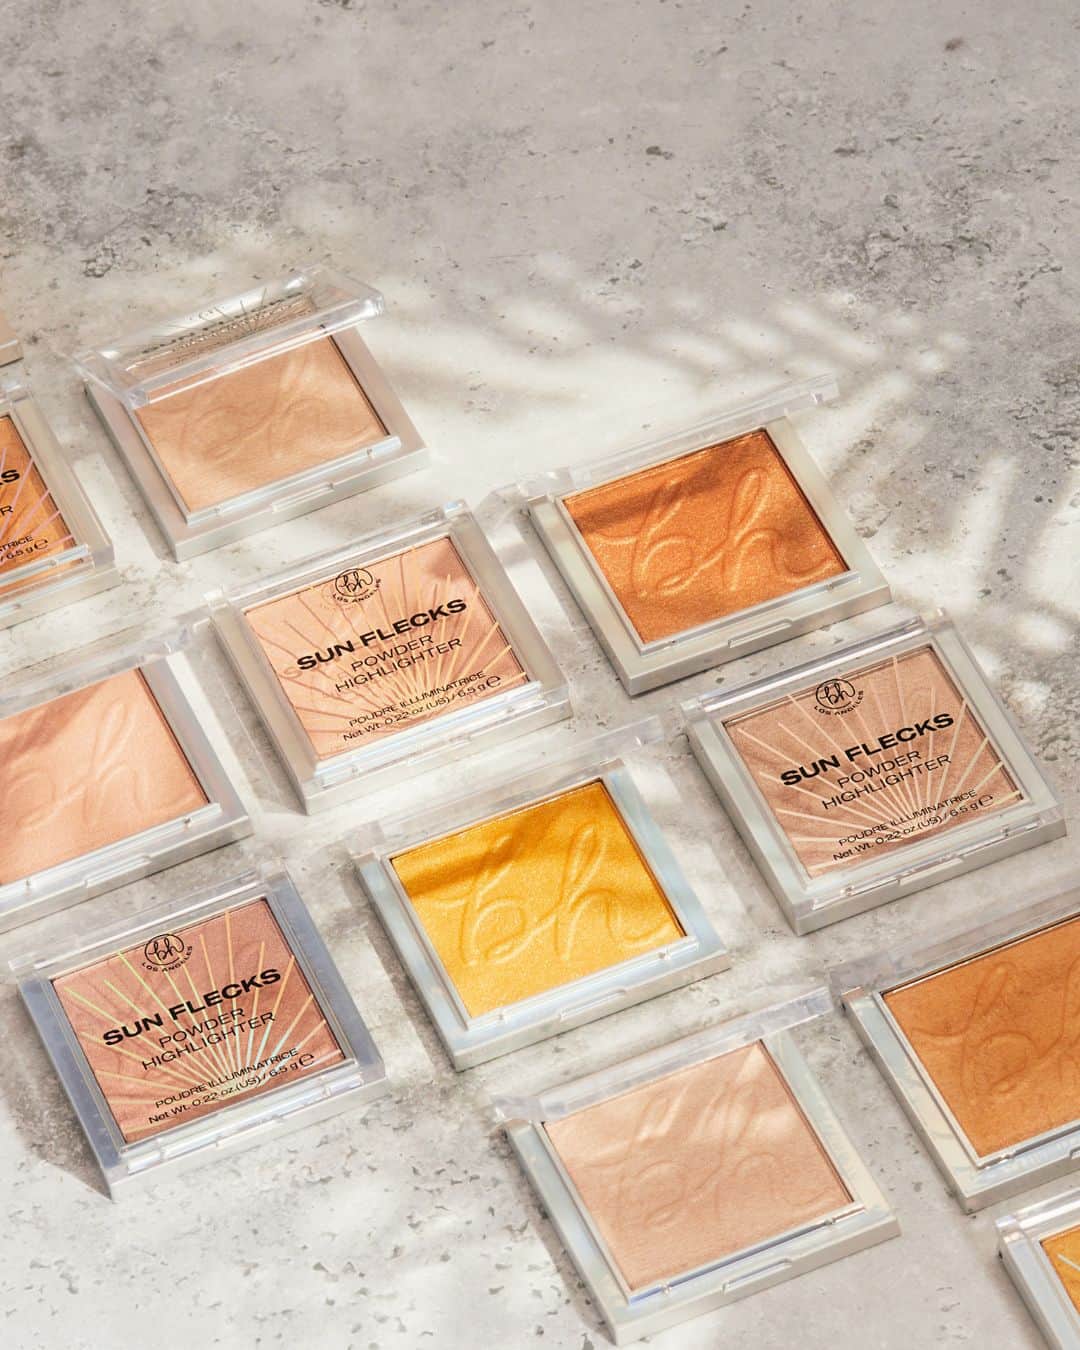 BH Cosmeticsのインスタグラム：「Catch allll the rays & shine in all the right ways with our ✨new✨ SUN FLECKS Highlighters ☀️ 5 lightweight, soft-focus pressed powder highlighters that make golden hour, every hour 👏🤯 Grab your go-to brush & sweep on the glow for a natural, sheer radiance, or apply it wet for an ultra-gleam effect 💫⁣ ⁣ Available in 5 universally-flattering shades⁣ ☀️ Beverly Hills: Burnt champagne⁣ ☀️ Bel Air: Gleaming Incandescent Opal⁣ ☀️ Cali Summer: Soft golden bronze⁣ ☀️ Golden State: True Gold⁣ ☀️ Sun Chaser: Pearly pink with a hint of peach⁣ ⁣ How To Use 👇⁣ Apply it to the highest points of your face, the inner corners of your eyes, and wherever else you want to beam bright!⁣ ⁣ 🌱 Vegan 🐰 Cruelty-Free 🧼 Clean Ingredients⁣ ⁣ #bhcosmetics」